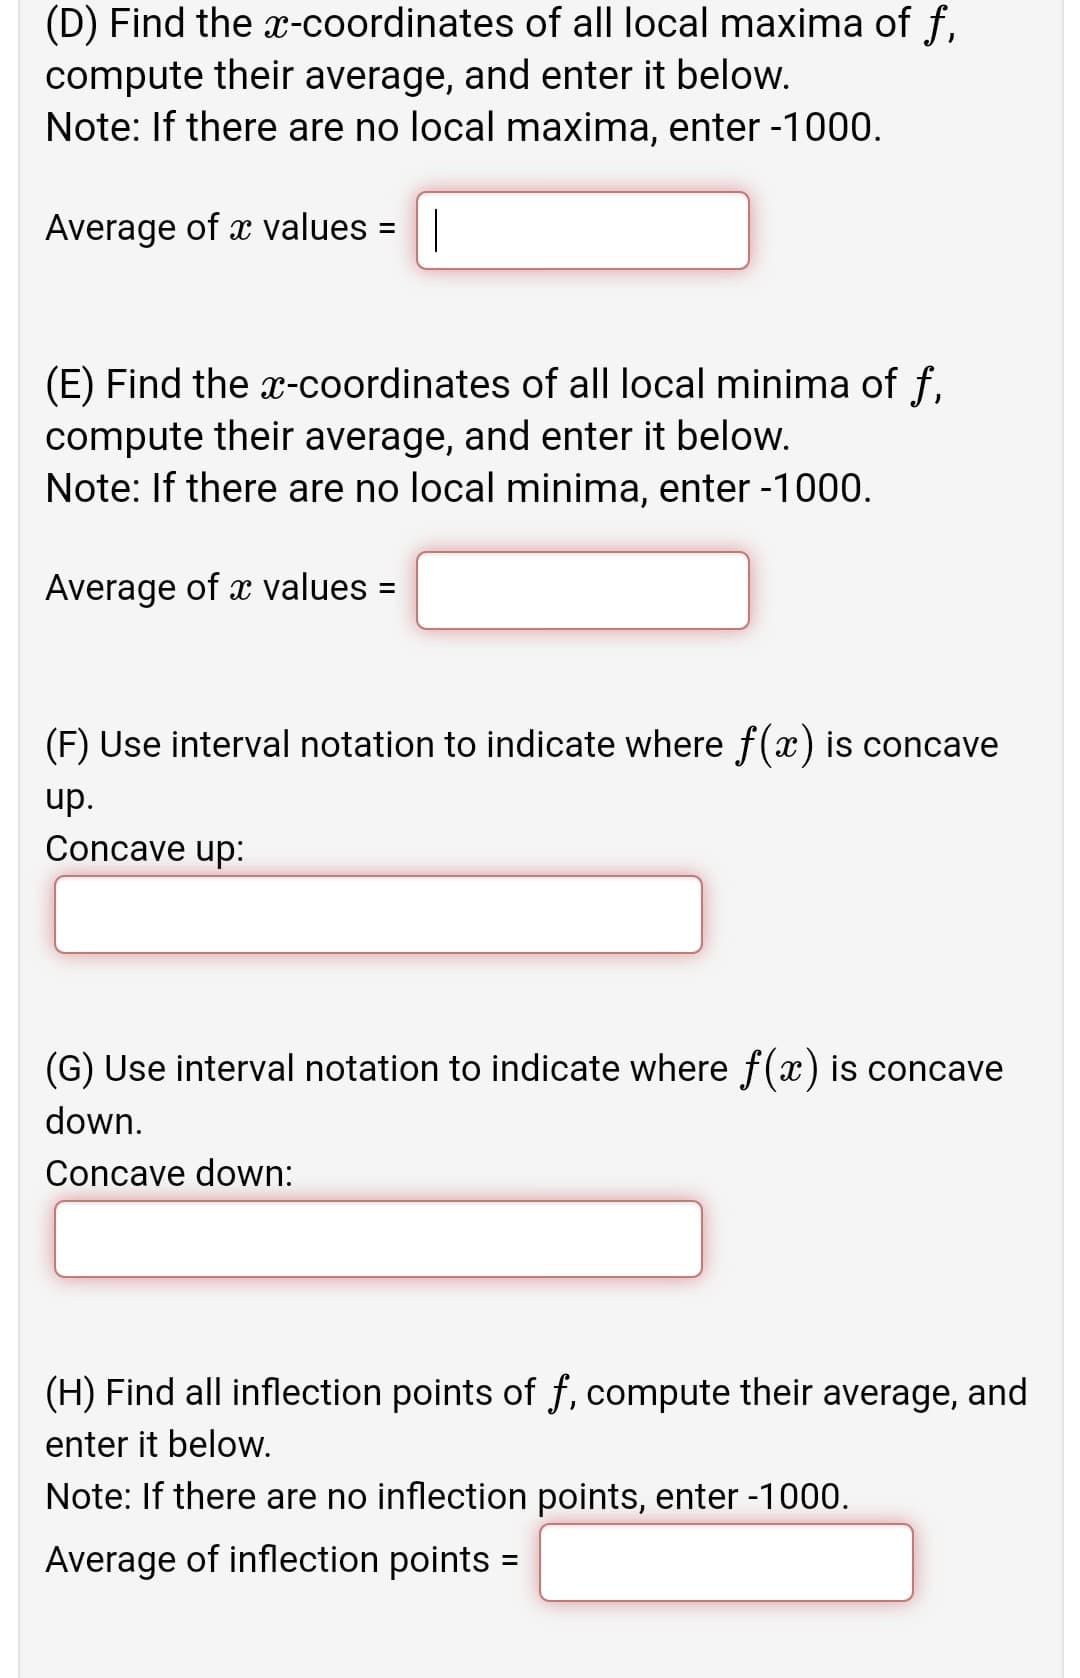 (D) Find the x-coordinates of all local maxima of f,
compute their average, and enter it below.
Note: If there are no local maxima, enter -1000.
Average of x values =||
%3D
(E) Find the x-coordinates of all local minima of f,
compute their average, and enter it below.
Note: If there are no local minima, enter -1000.
Average of x values =
(F) Use interval notation to indicate where f(x) is concave
up.
Concave up:
(G) Use interval notation to indicate where f(x) is concave
down.
Concave down:
(H) Find all inflection points of f, compute their average, and
enter it below.
Note: If there are no inflection points, enter -1000.
Average of inflection points =
